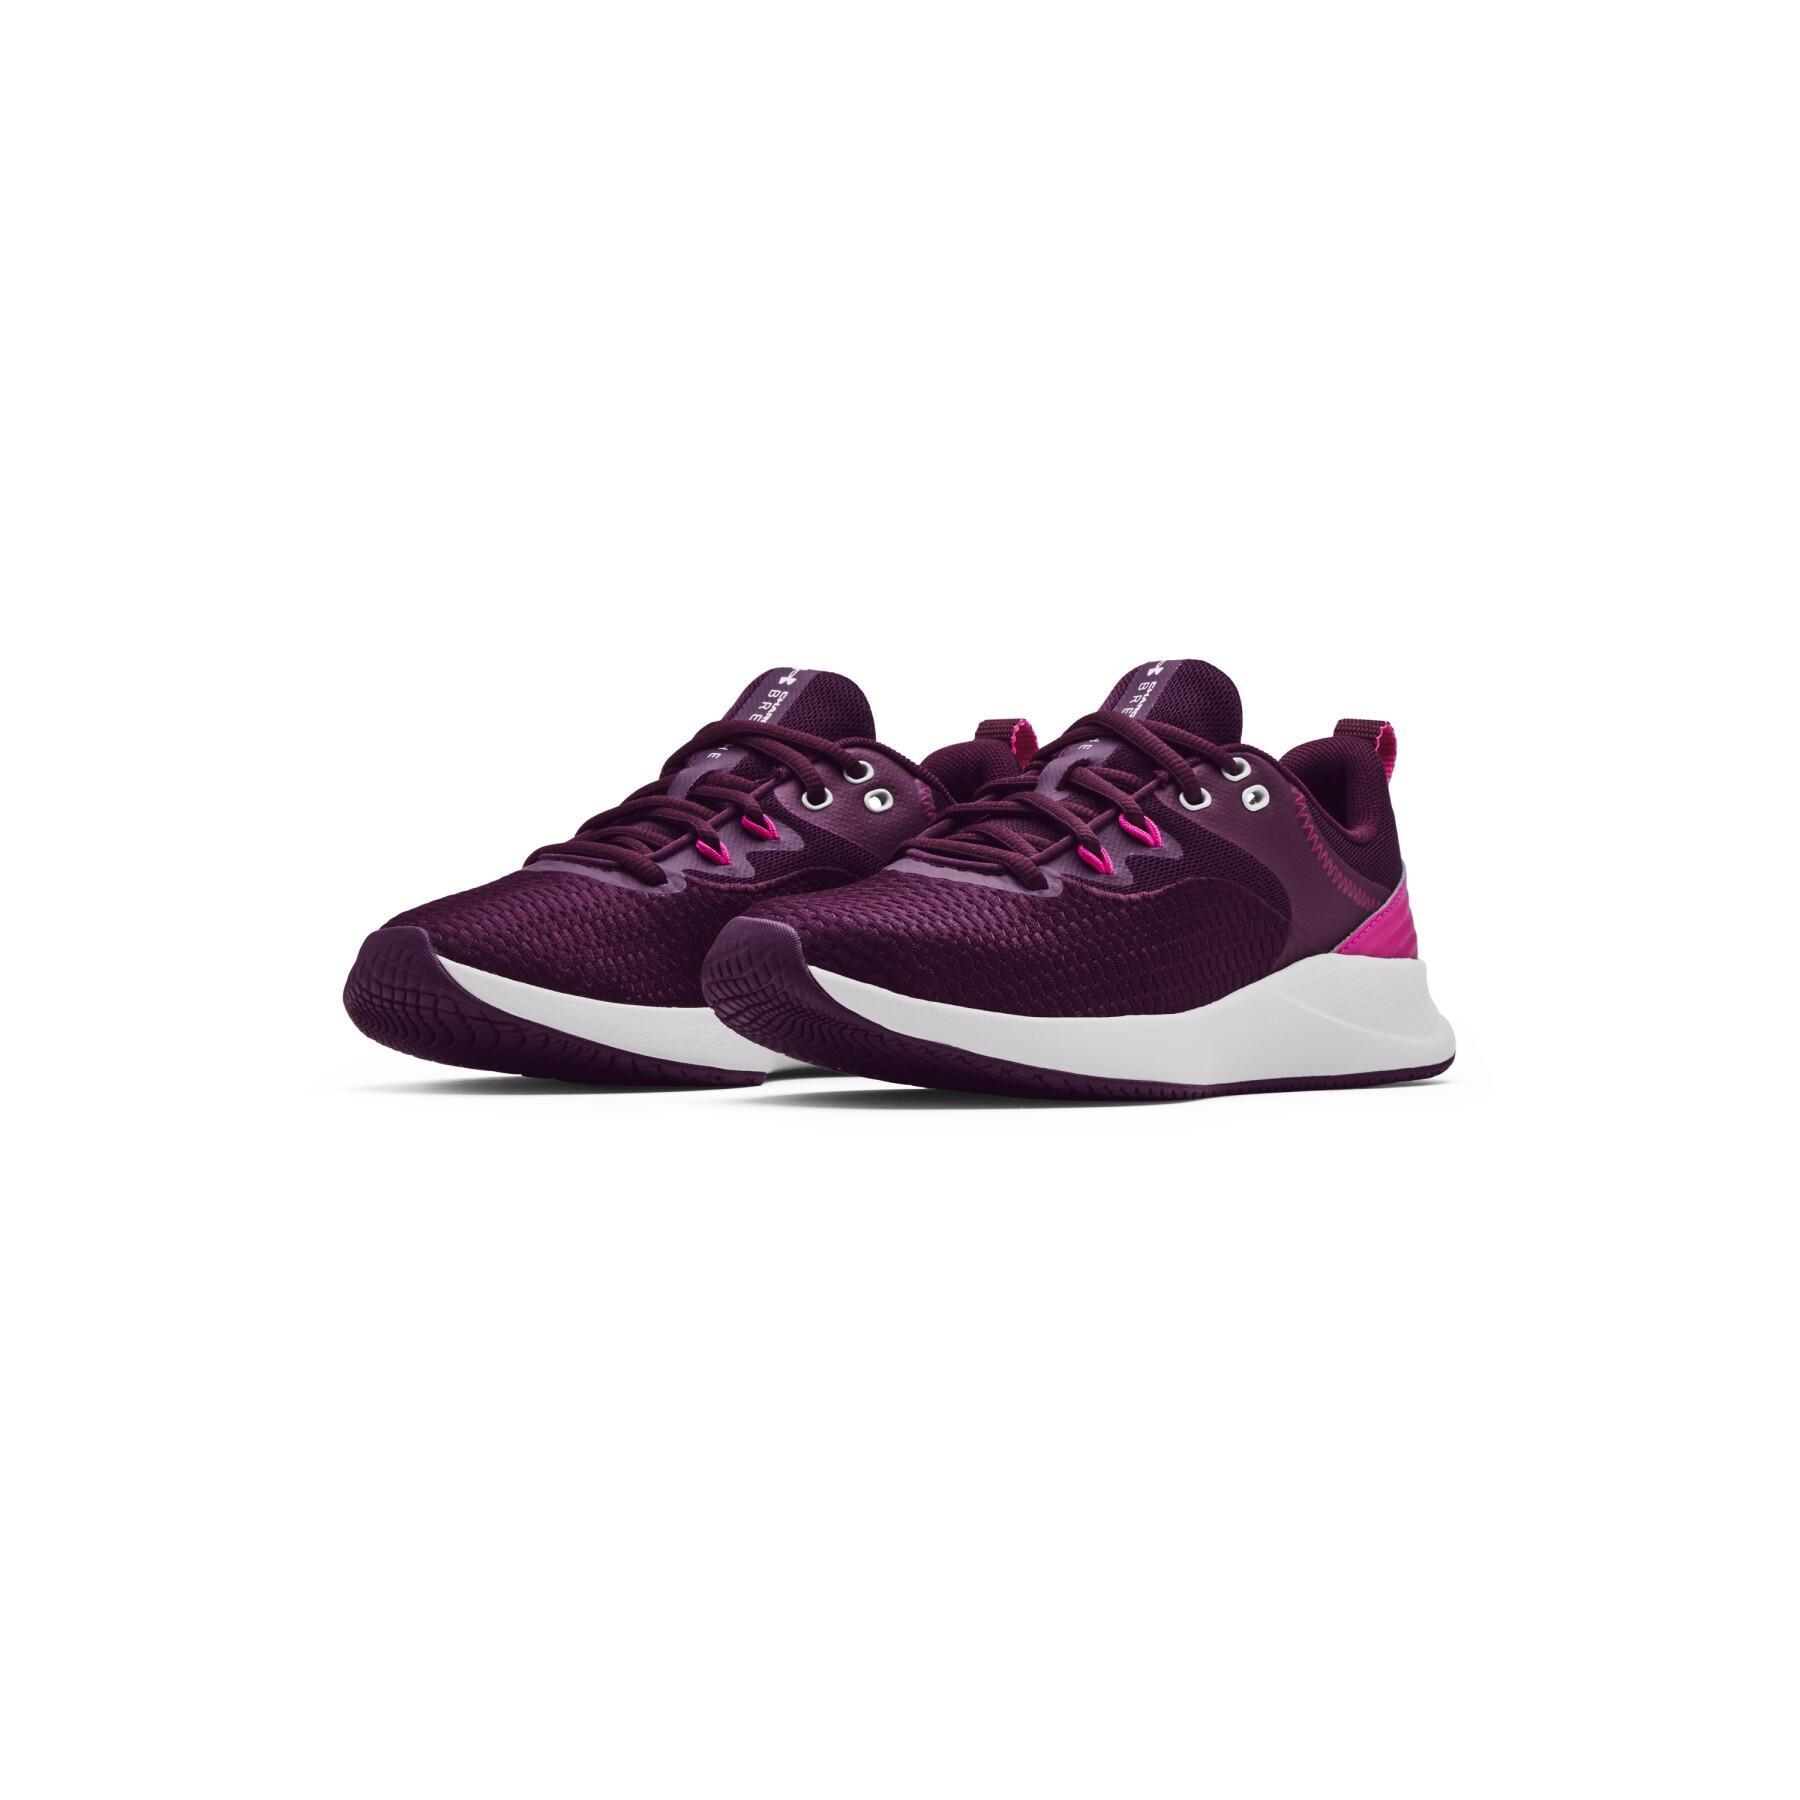 Women's training shoes Under Armour Charged Breathe TR 3